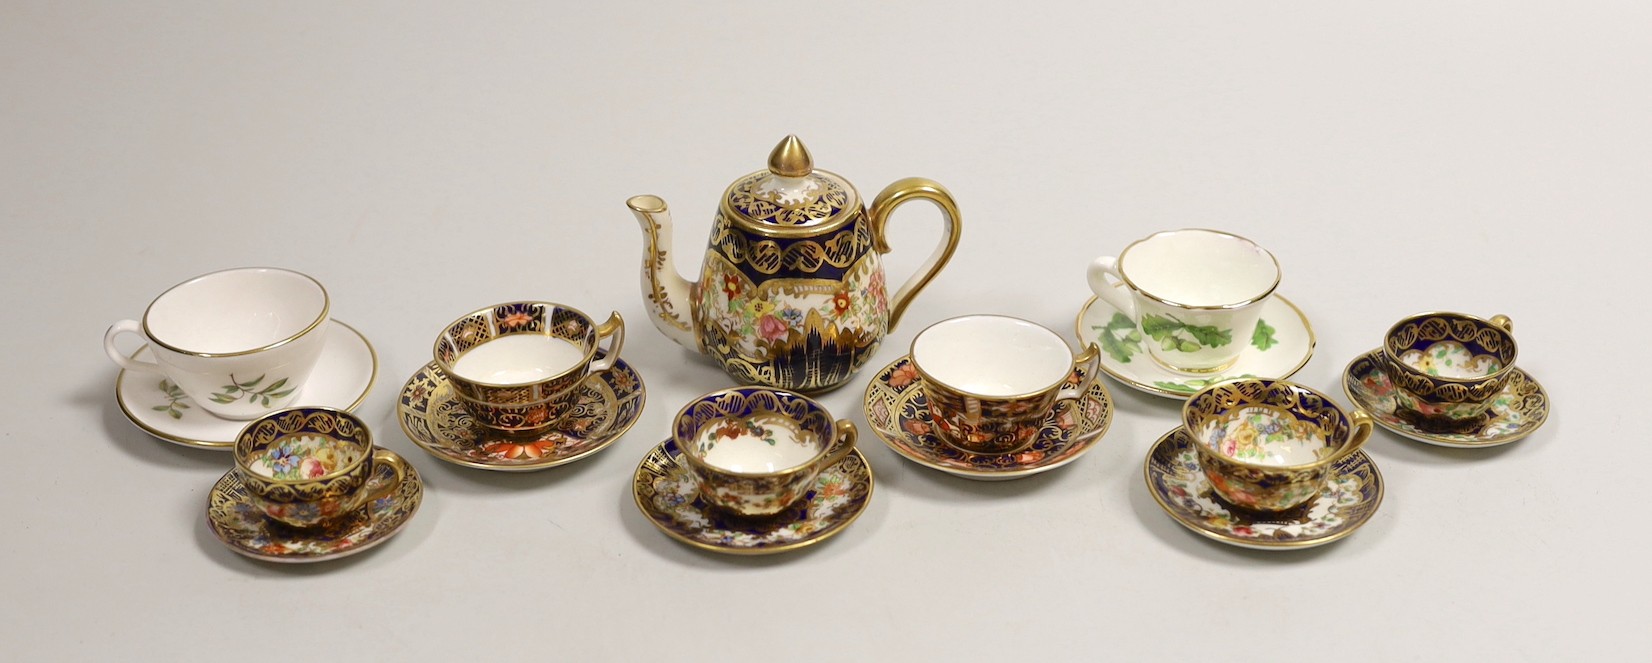 Miniature bone china teaware including Spode and Royal Crown Derby                                                                                                                                                          